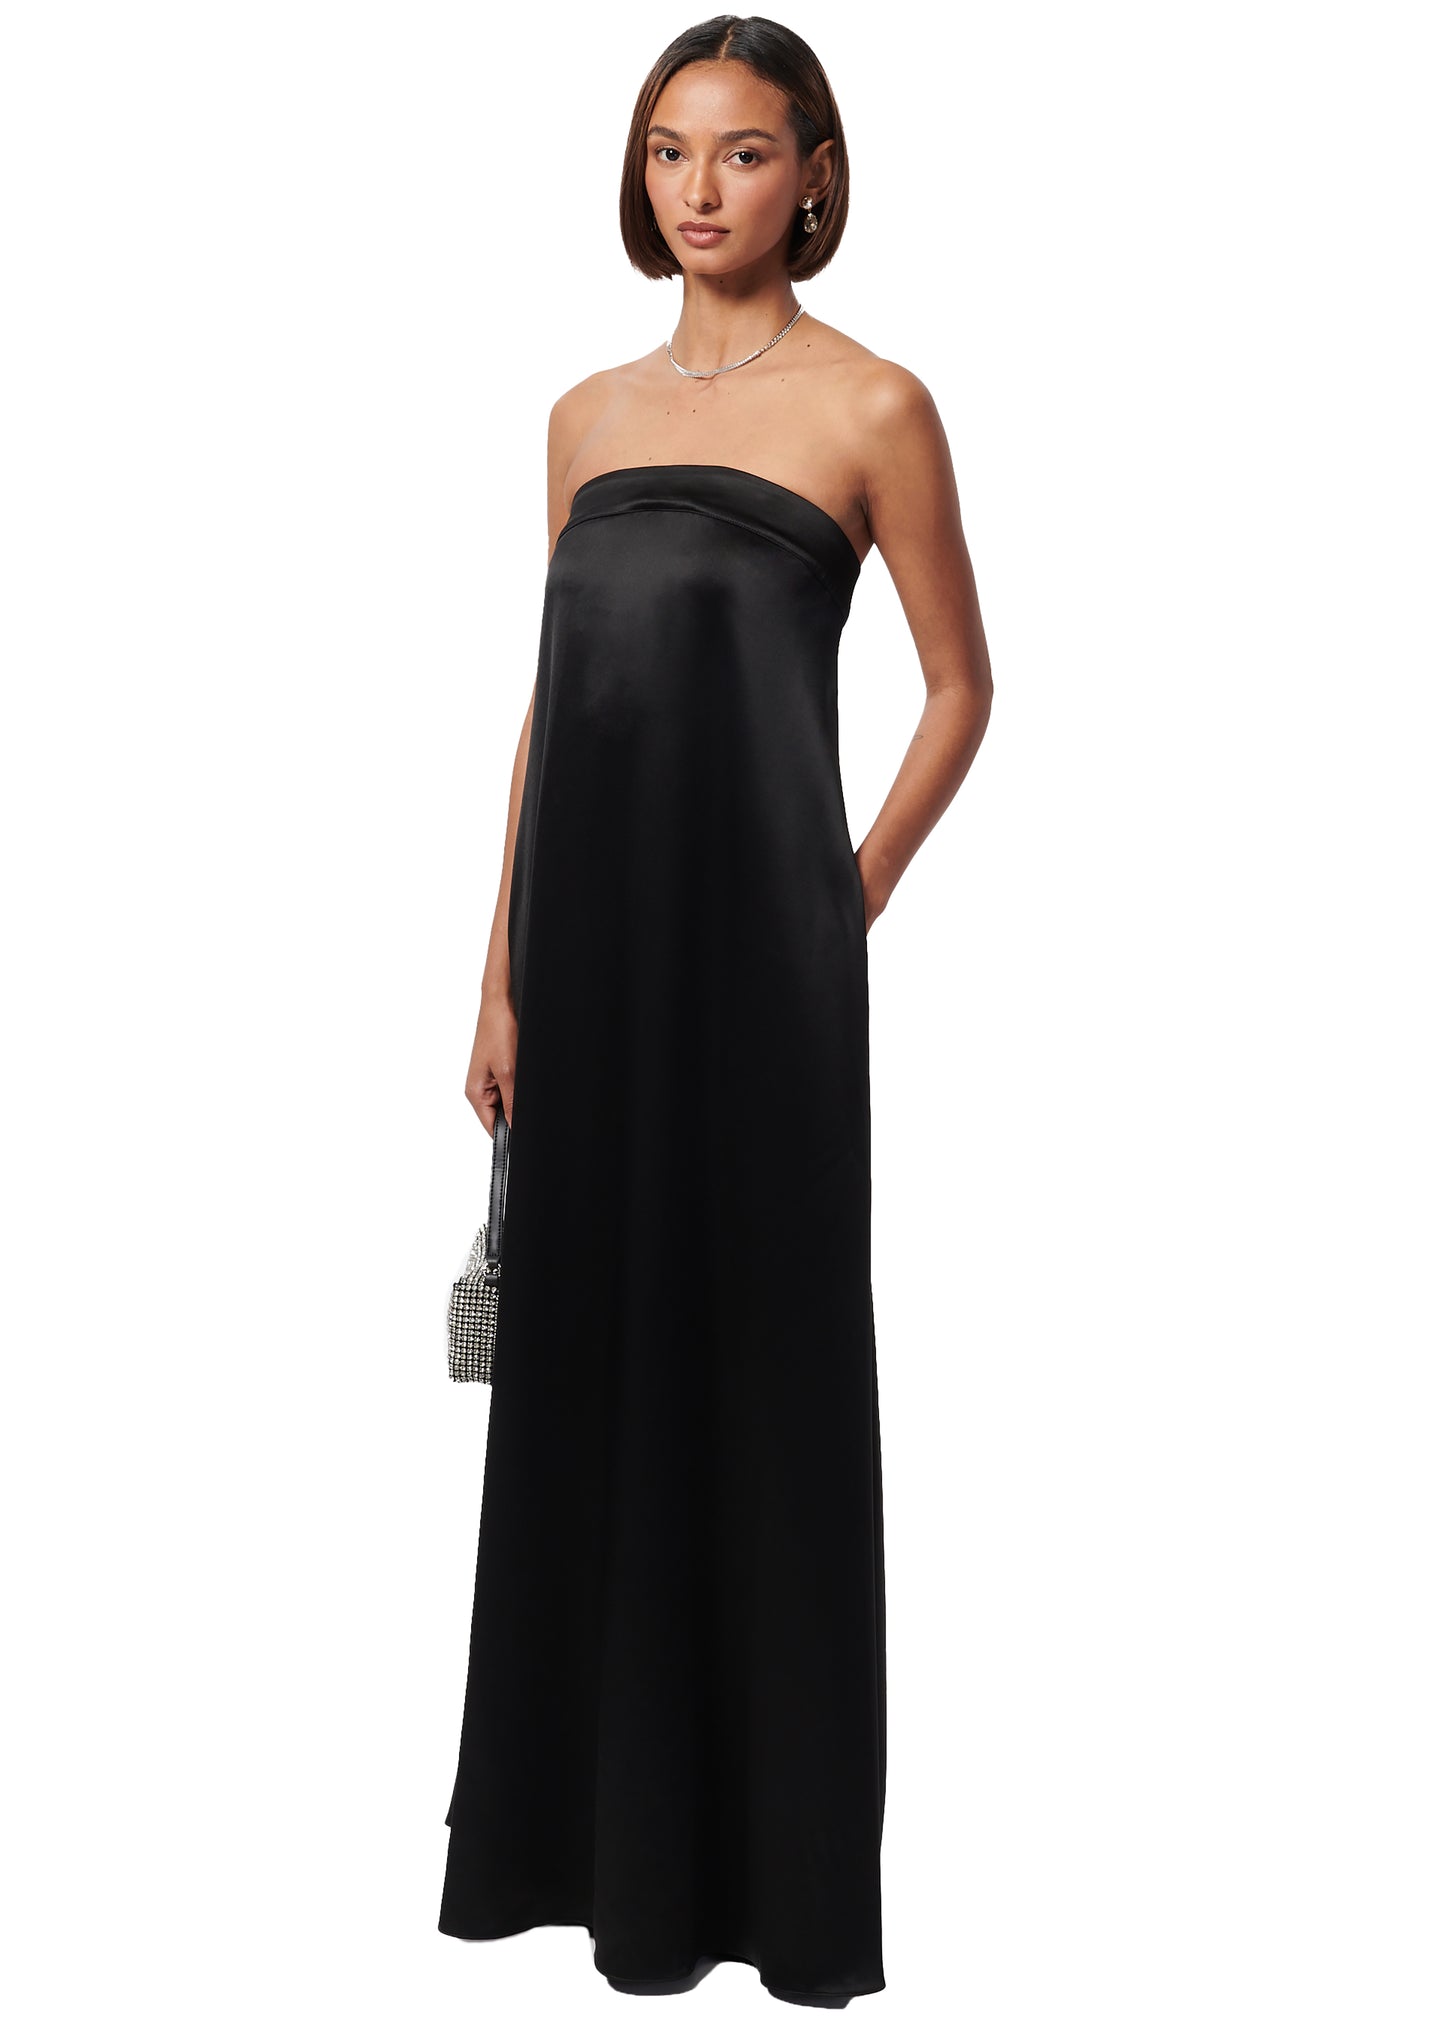 Cami NYC Marsia gown